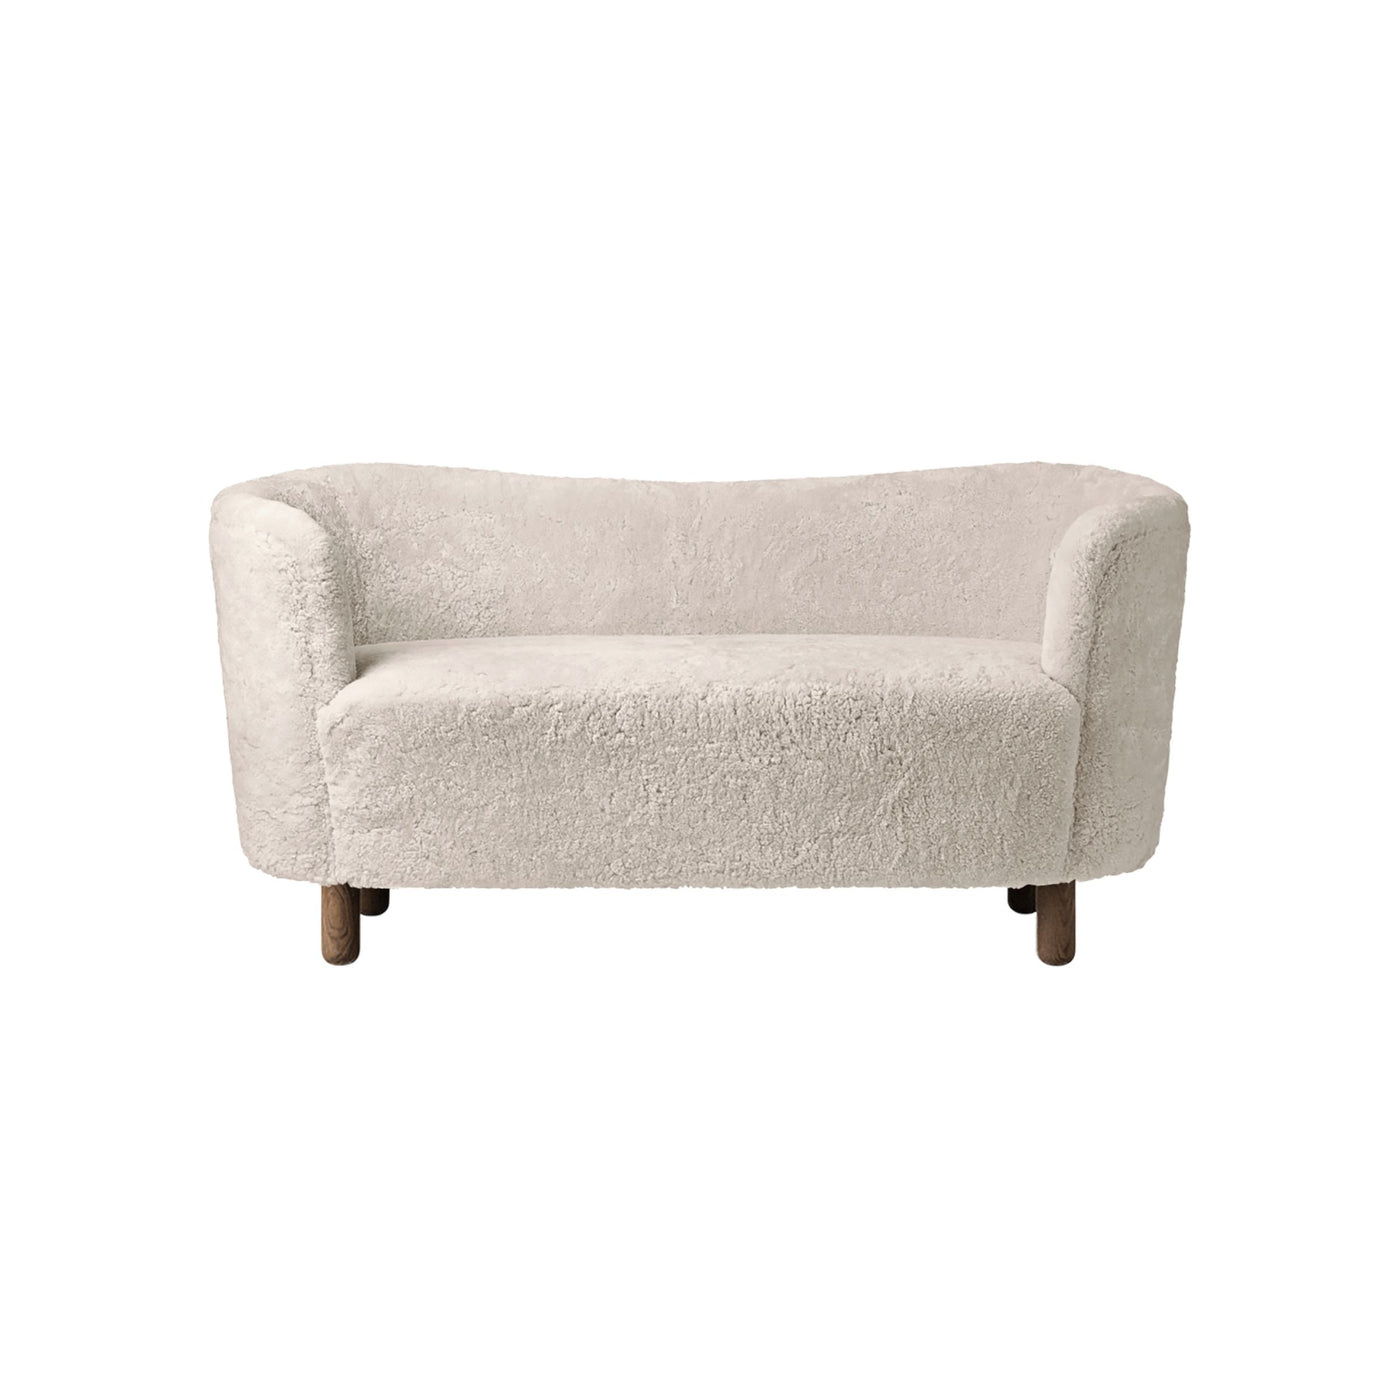 By Lassen Mingle sofa with smoked oak legs. Made to order from someday designs. #colour_sheepskin-moonlight